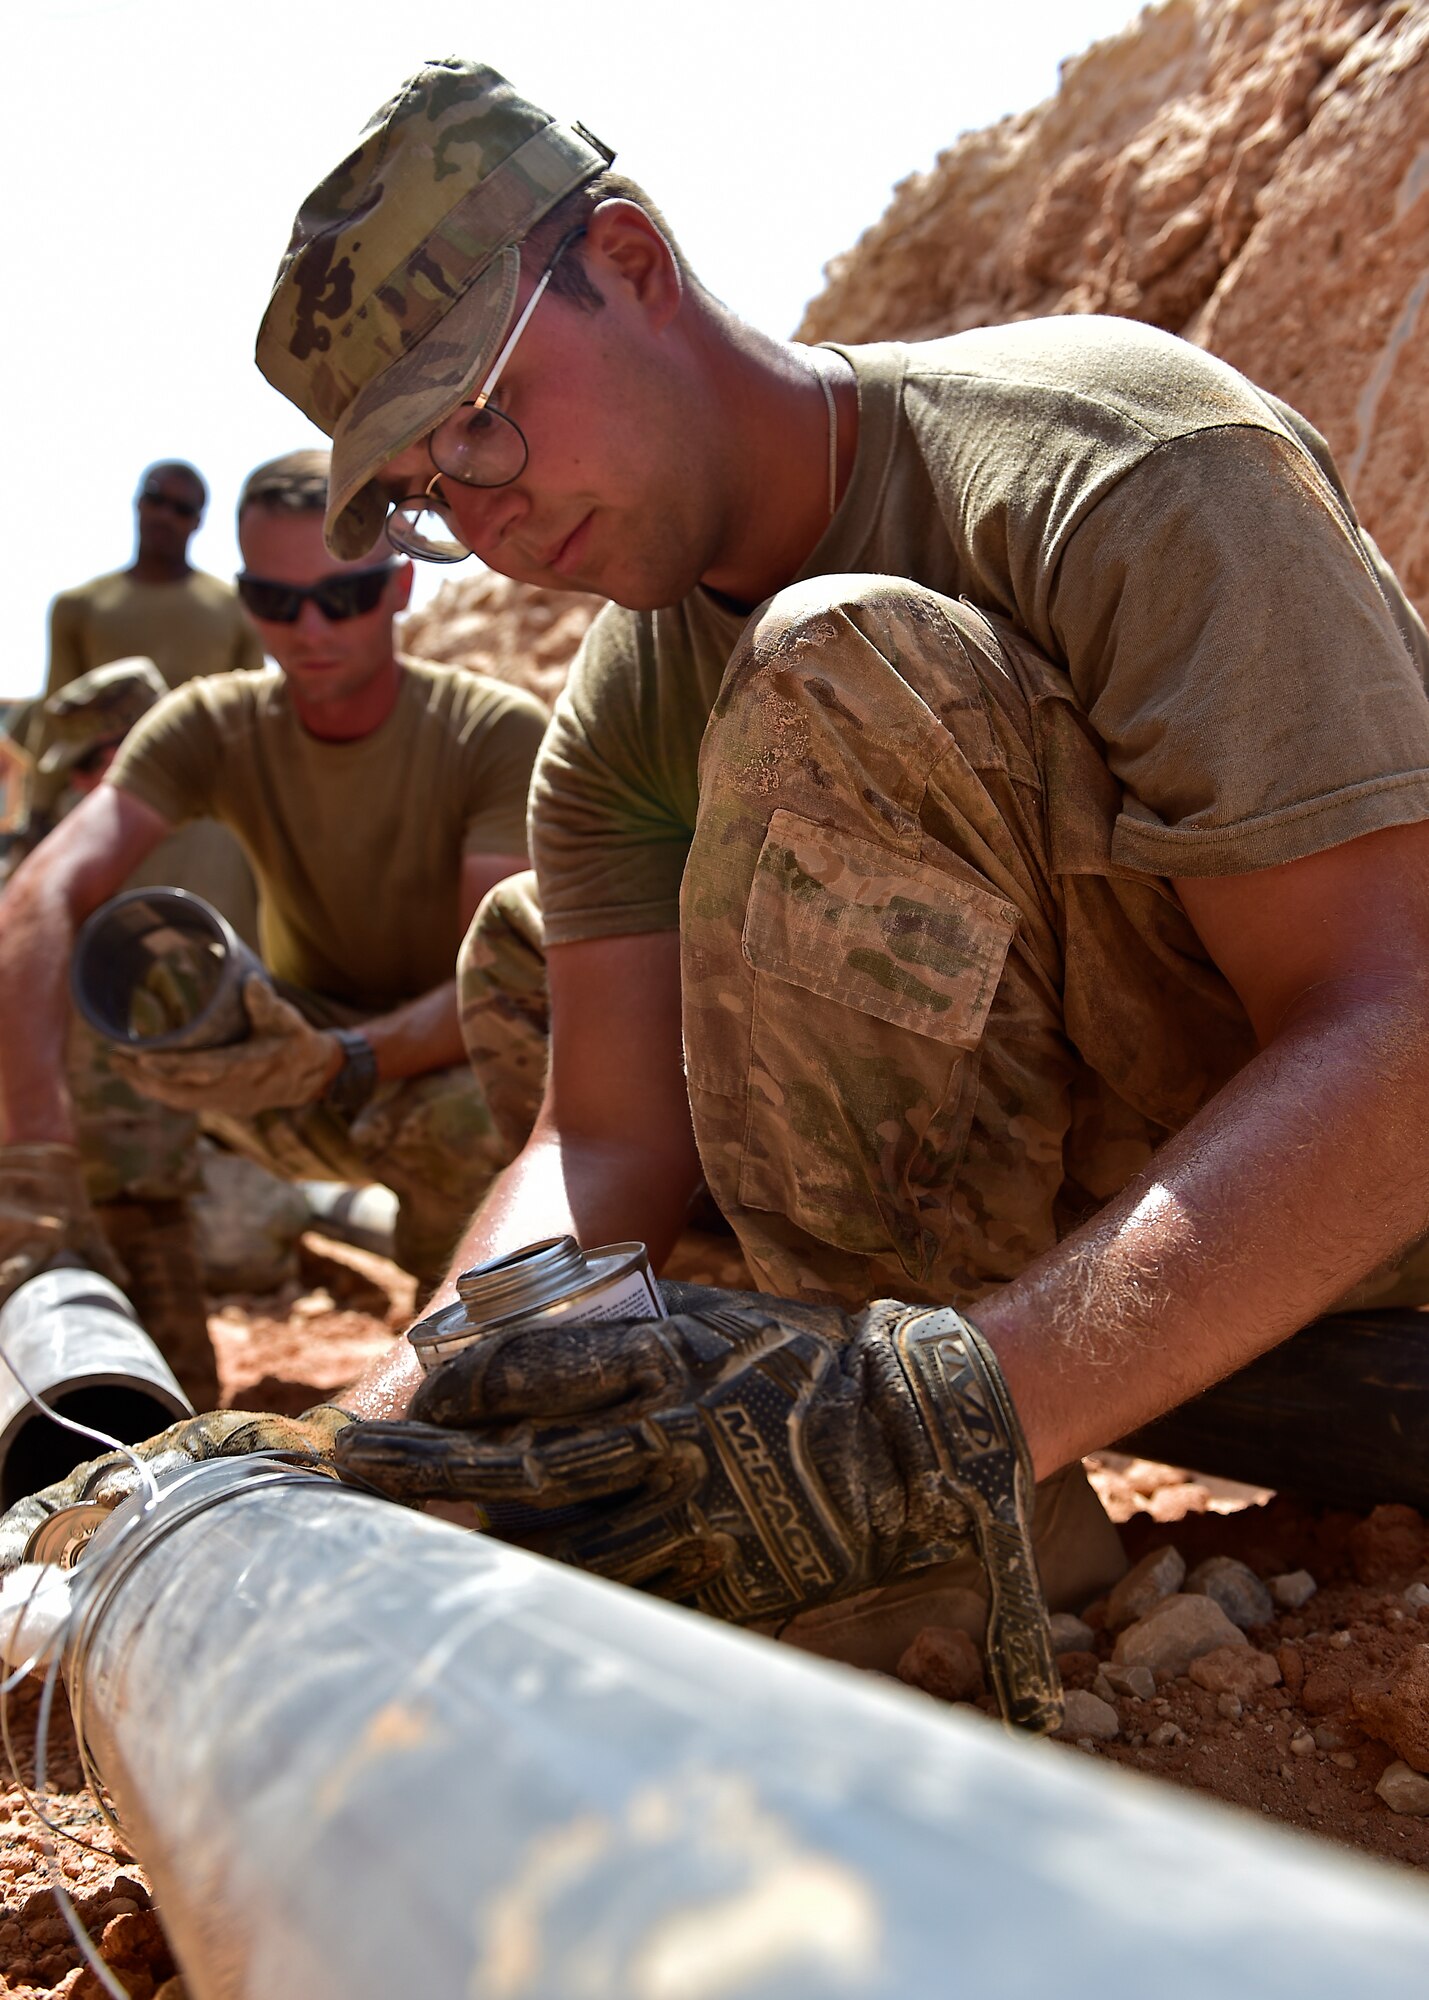 Airmen from the 378th Expeditionary Civil Engineer Squadron construct water and sewer lines at Prince Sultan Air Base, Kingdom of Saudi Arabia, July 28th, 2020.